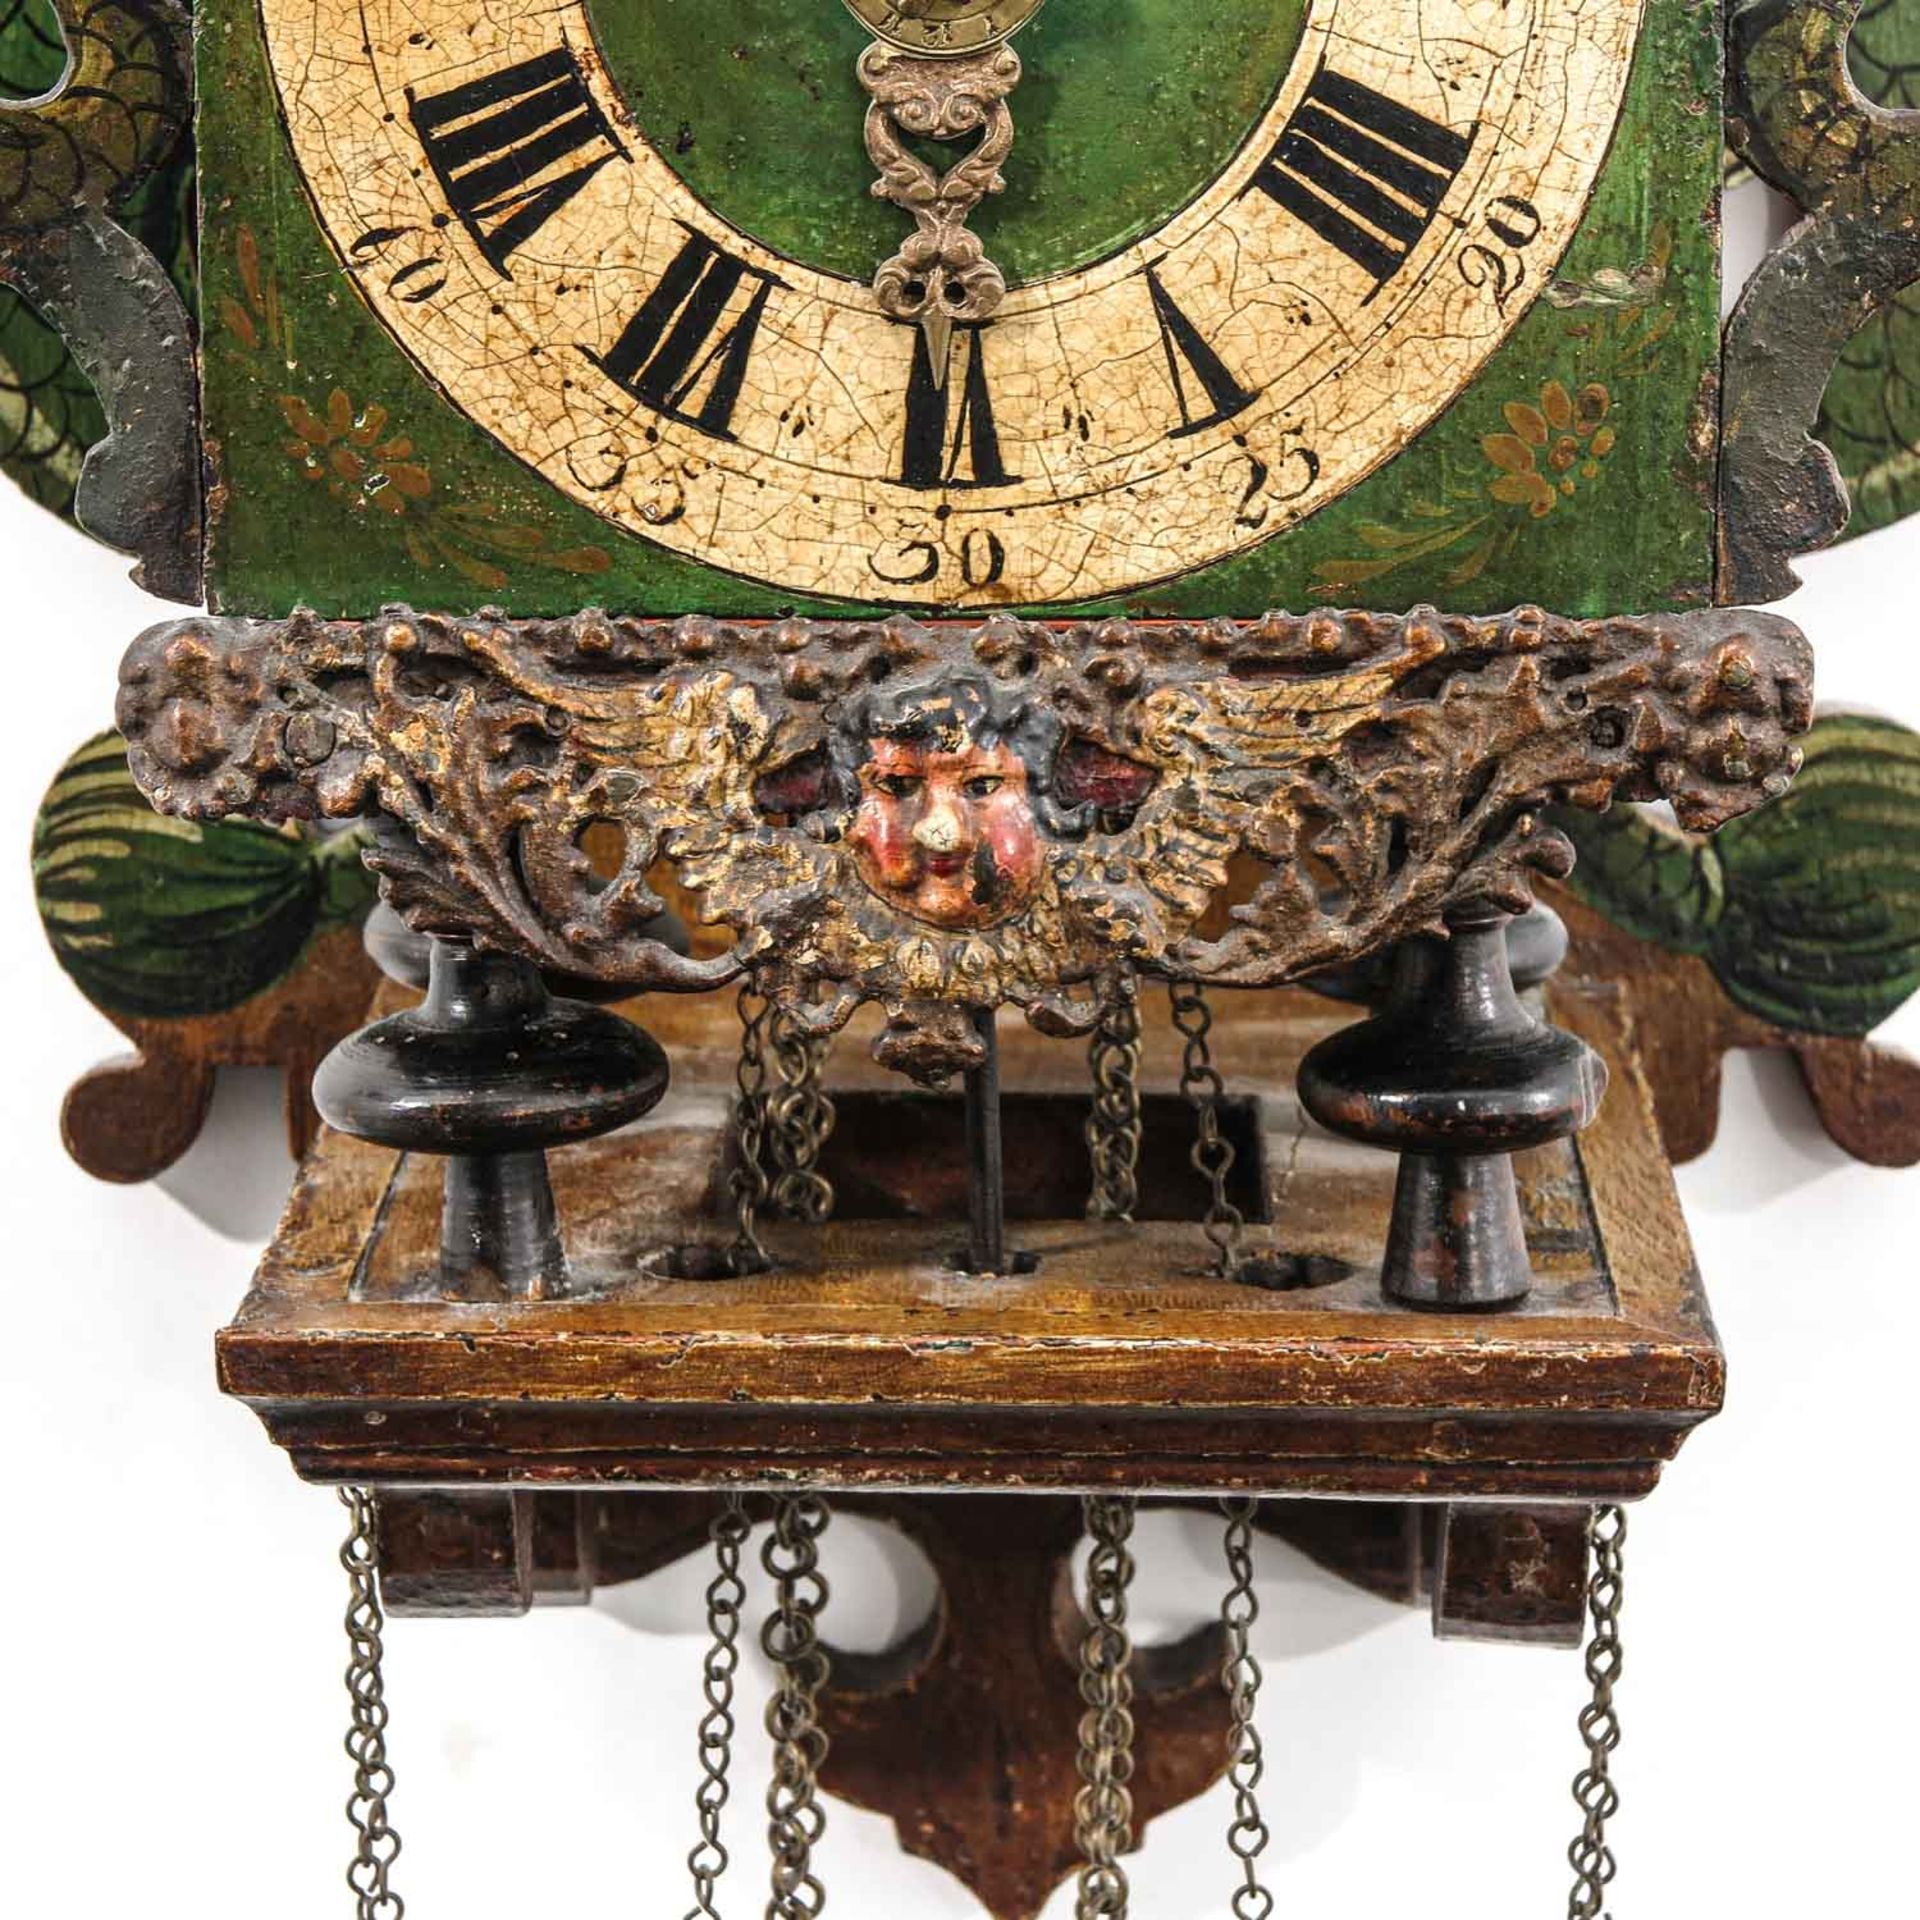 A 19th Century Friesland Wall Clock - Image 9 of 10